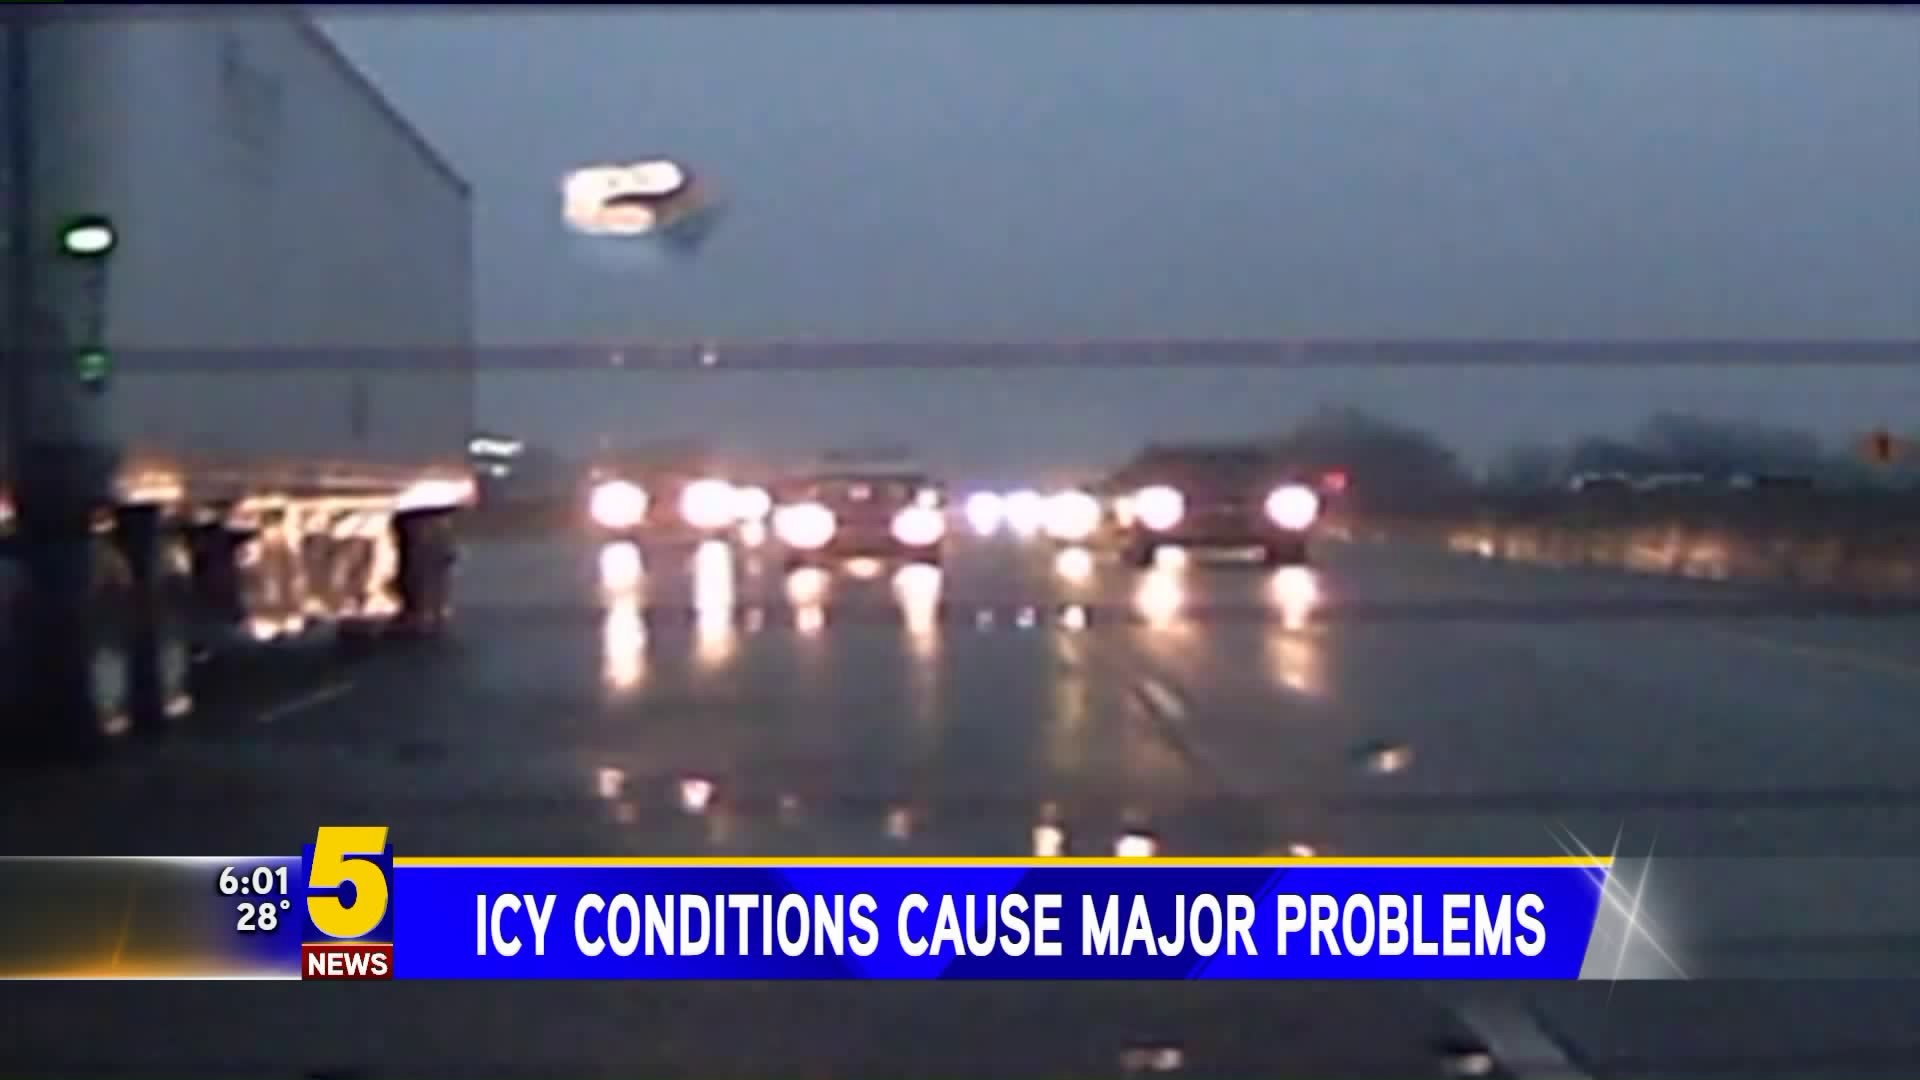 Icy Conditions Cause Major Problems